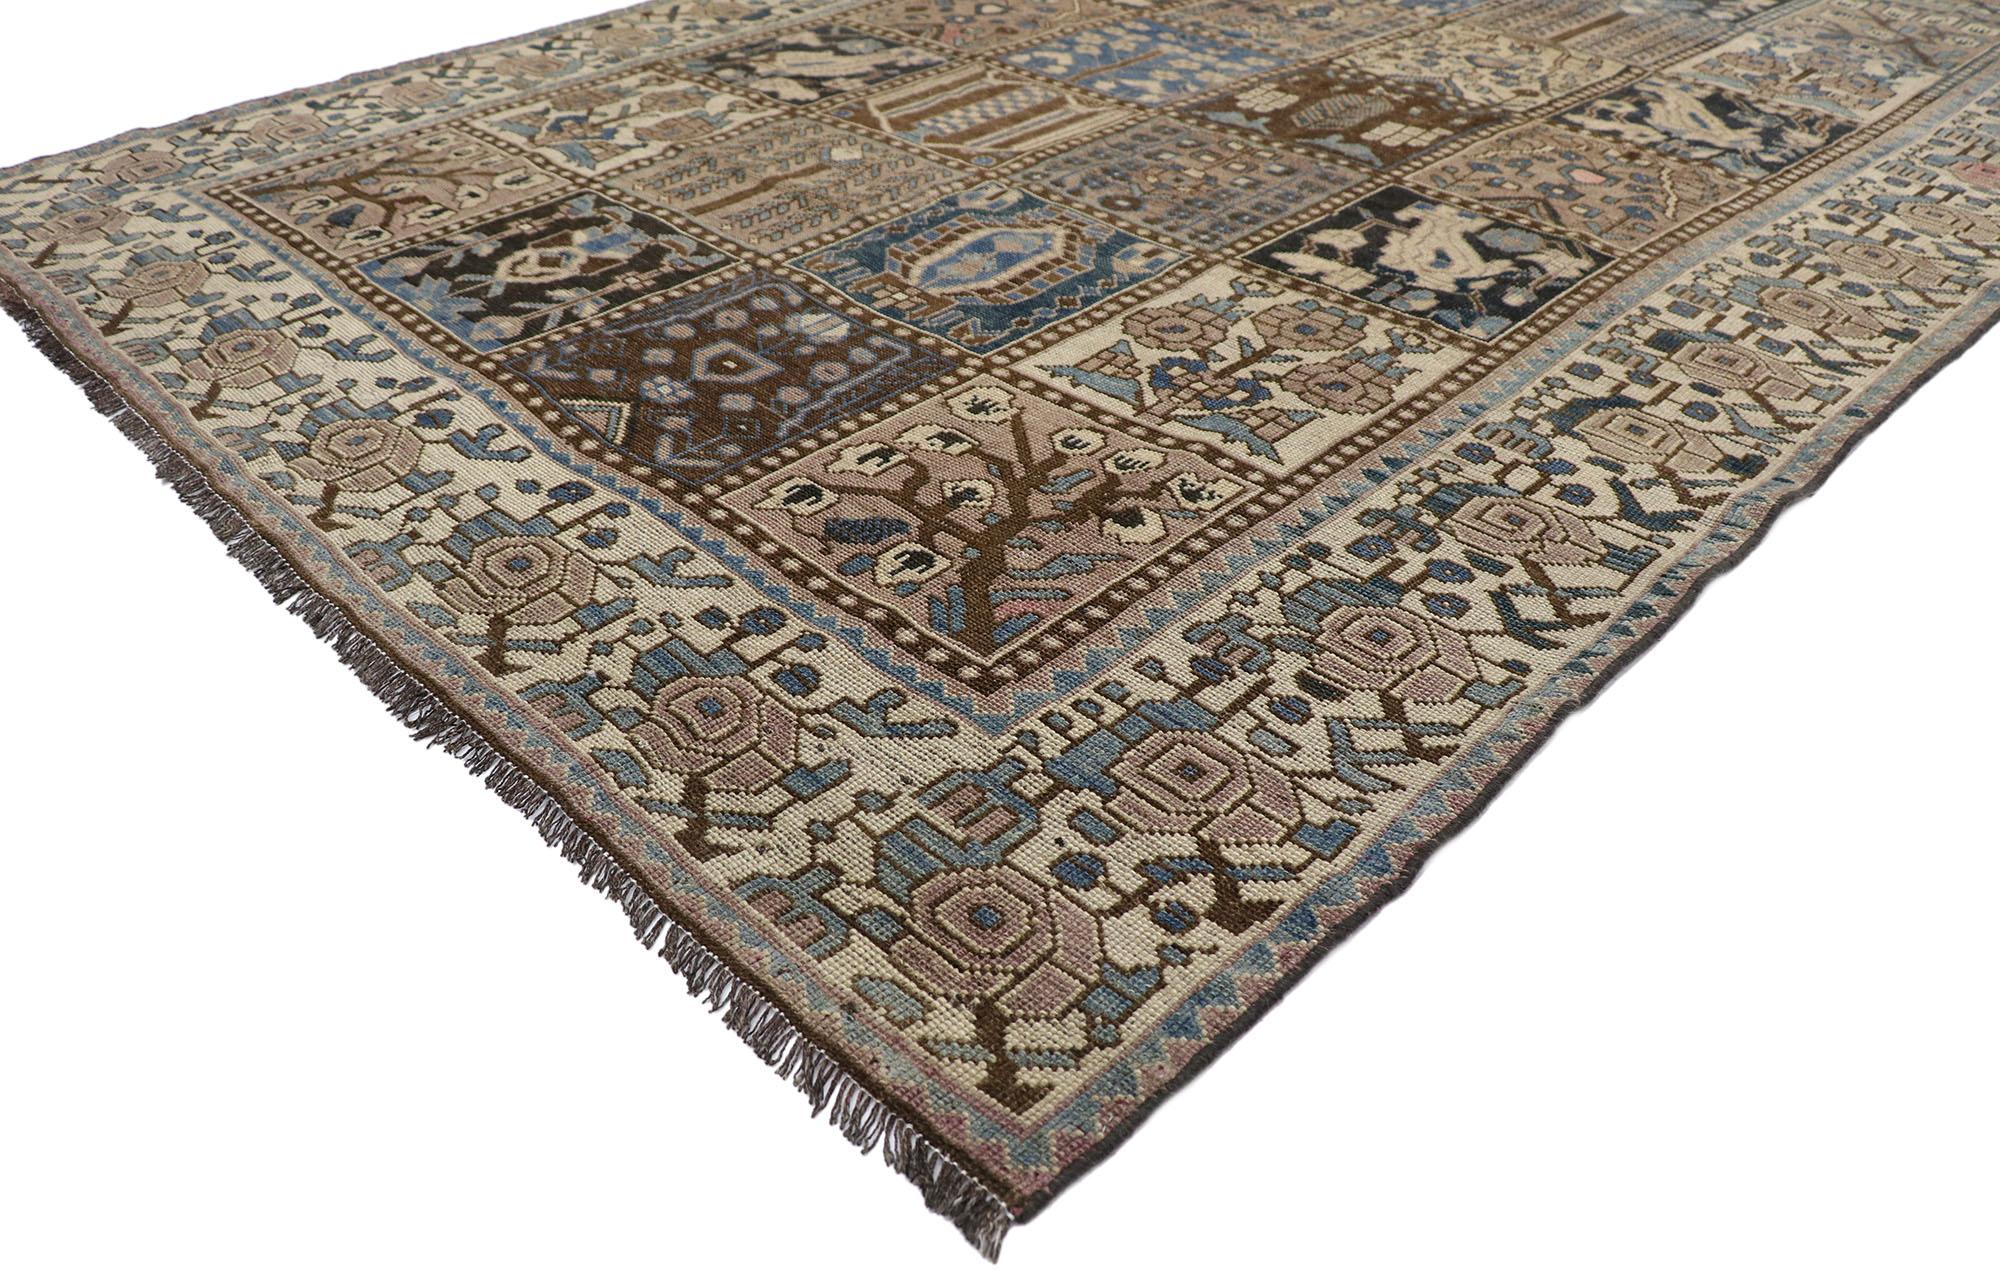 60821, distressed antique Persian Shiraz rug with Garden Panel Four Seasons design. Cleverly composed and distinctively well-balanced, this hand knotted wool distressed antique Persian Shiraz rug will take on a curated lived-in look that feels